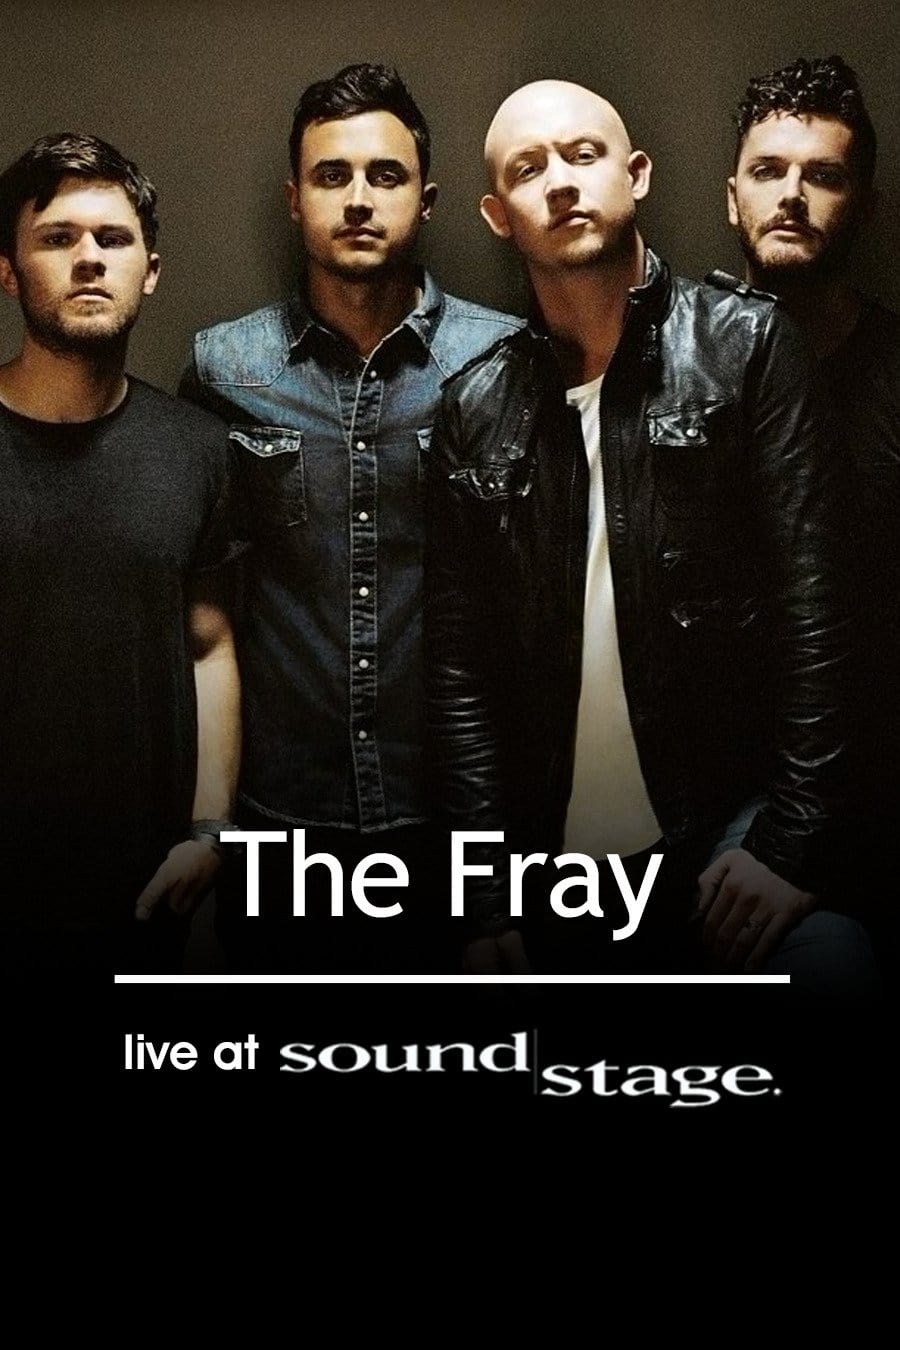 The Fray - Live at Soundstage